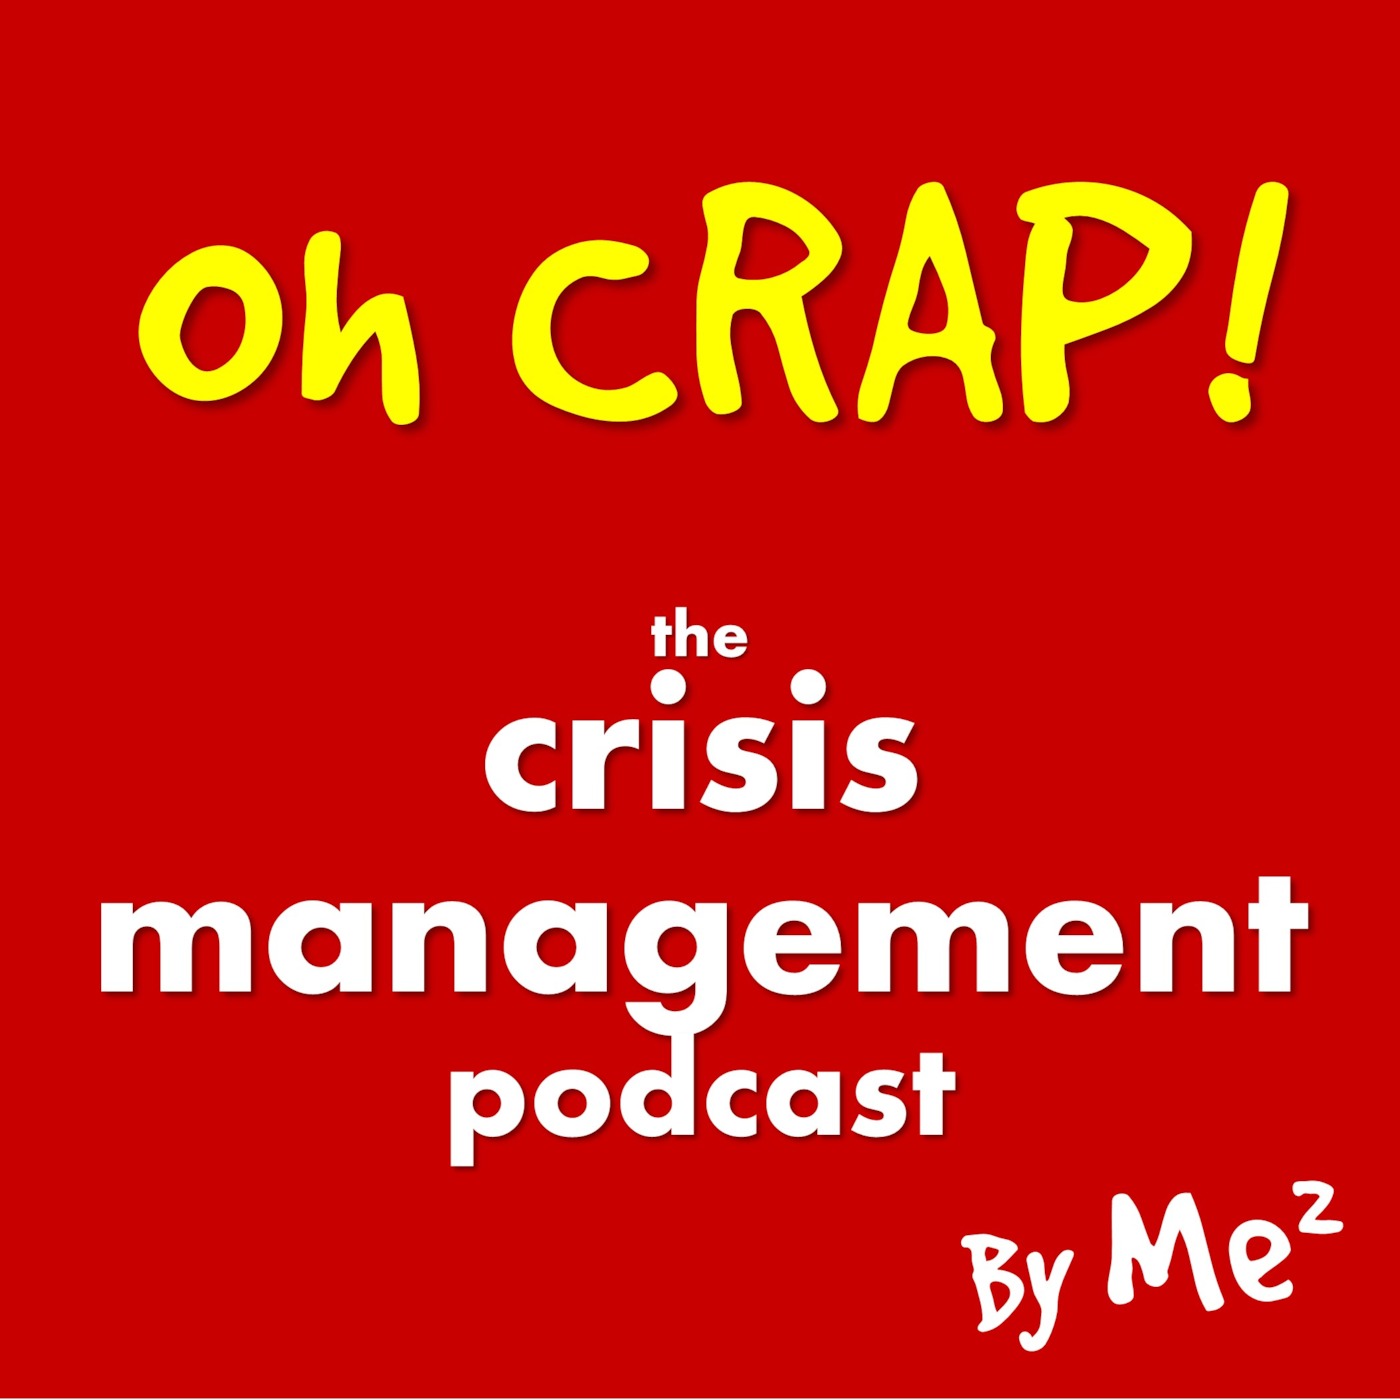 Episode S03E01 - 5 Ways to Identify a Business Crisis